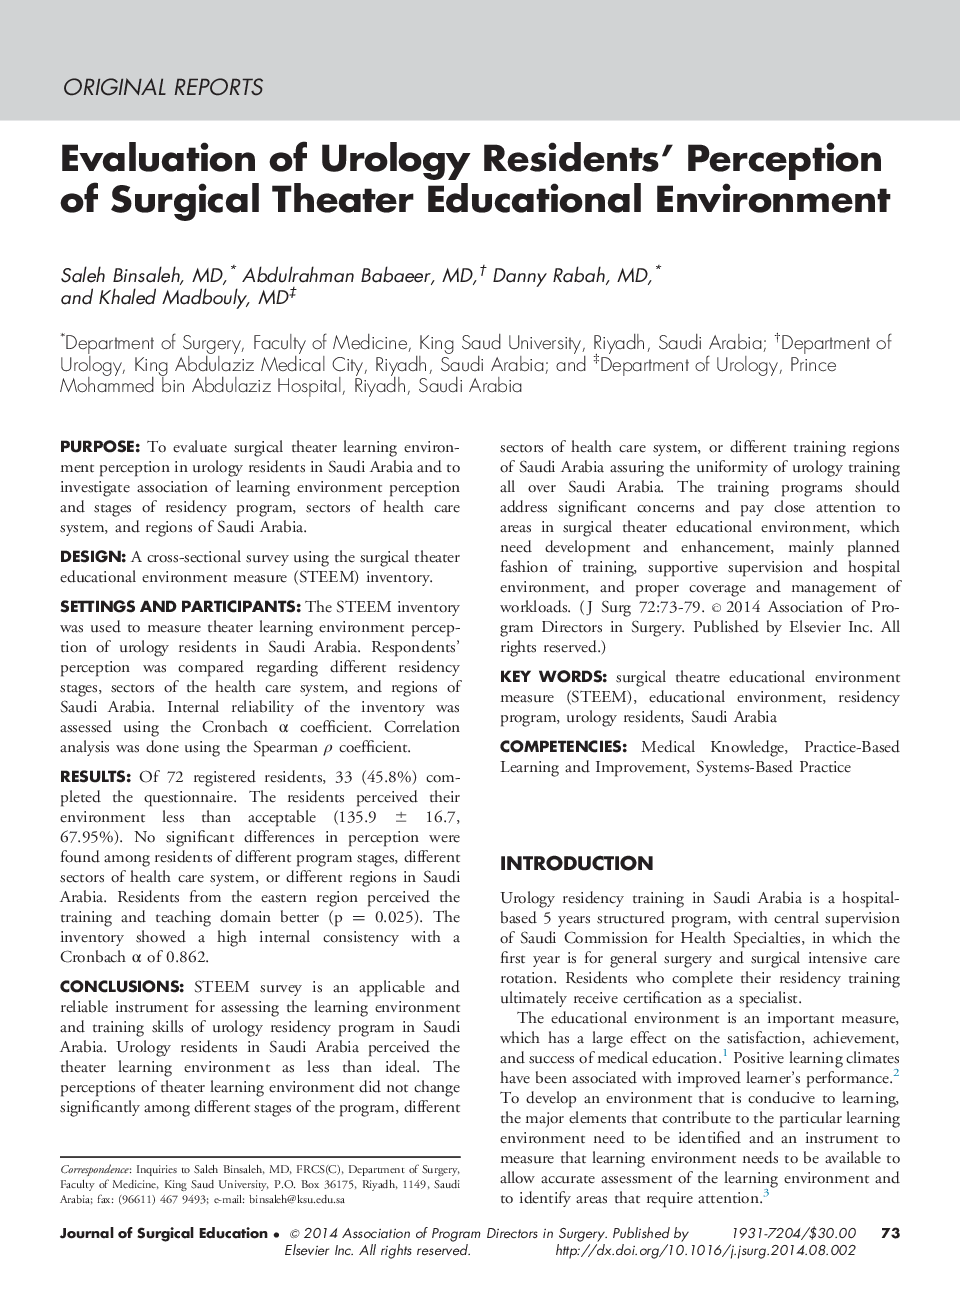 Evaluation of Urology Residents’ Perception of Surgical Theater Educational Environment